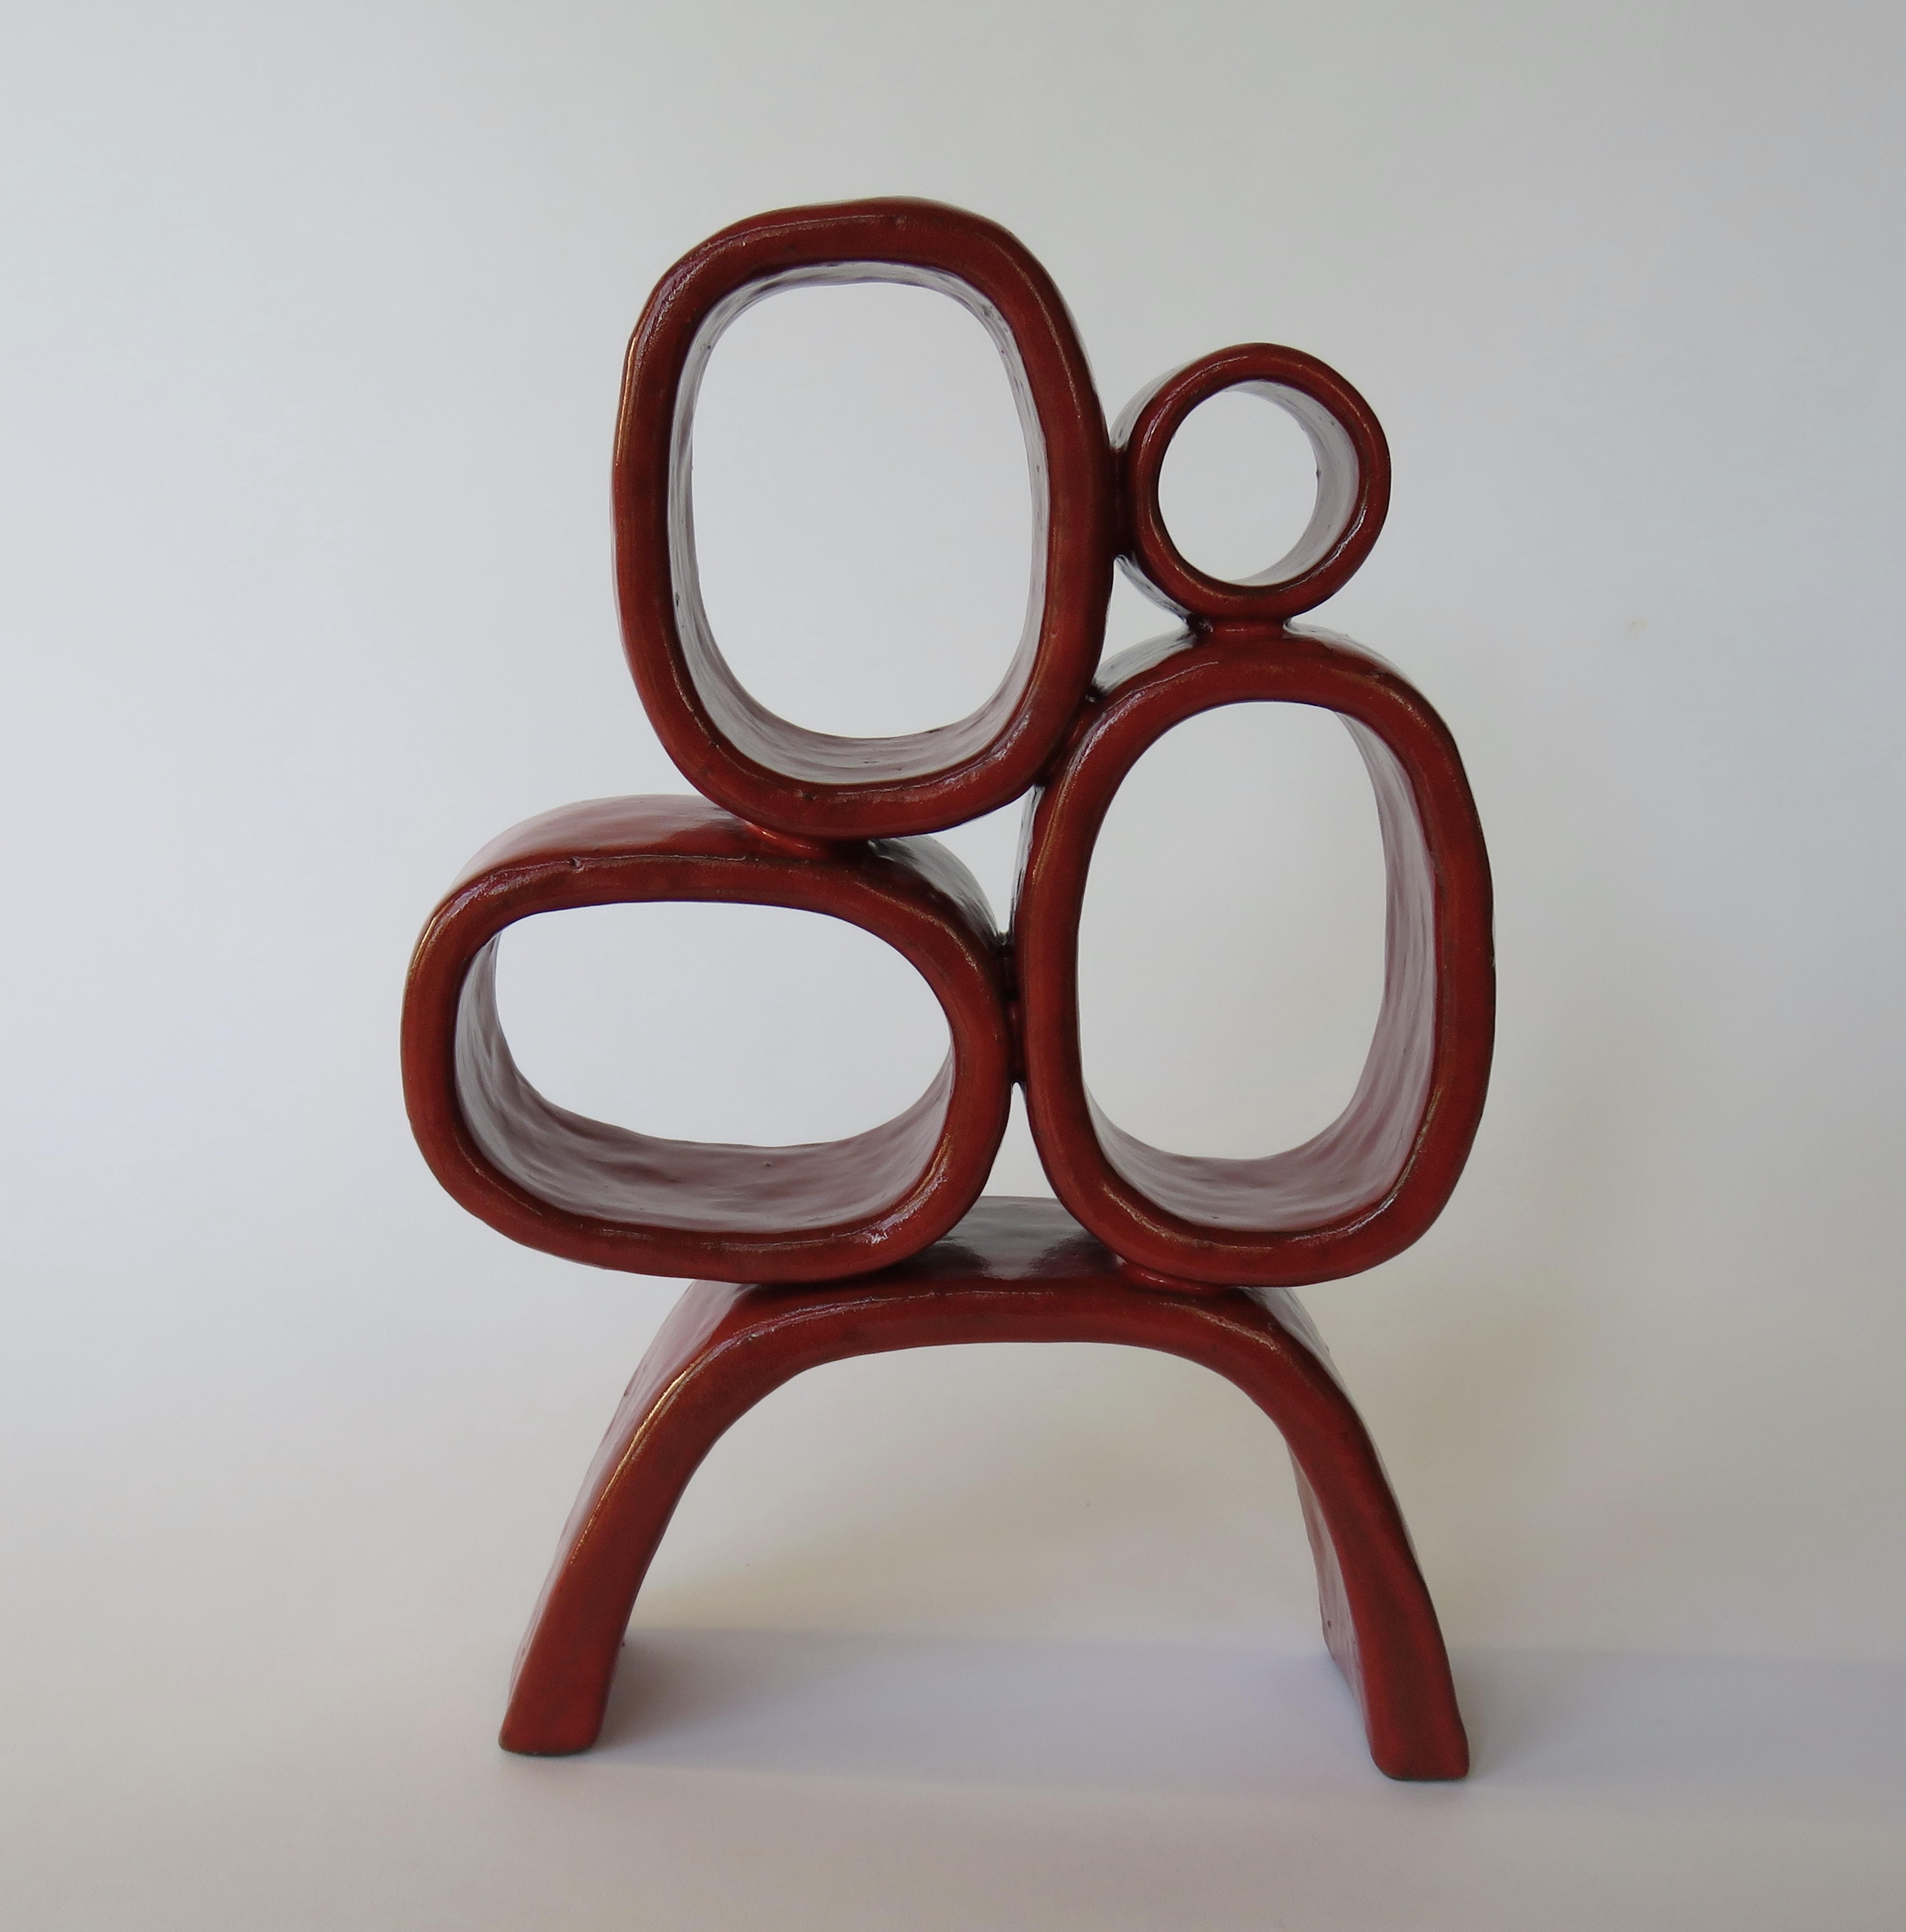 Four different-sized shiny red rectangular rings are balanced on angled legs, creating a unique Modern TOTEM. Created by Artist Helena Starcevic, this completely hand built ceramic sculpture is part of an ongoing series exploring the basic forms